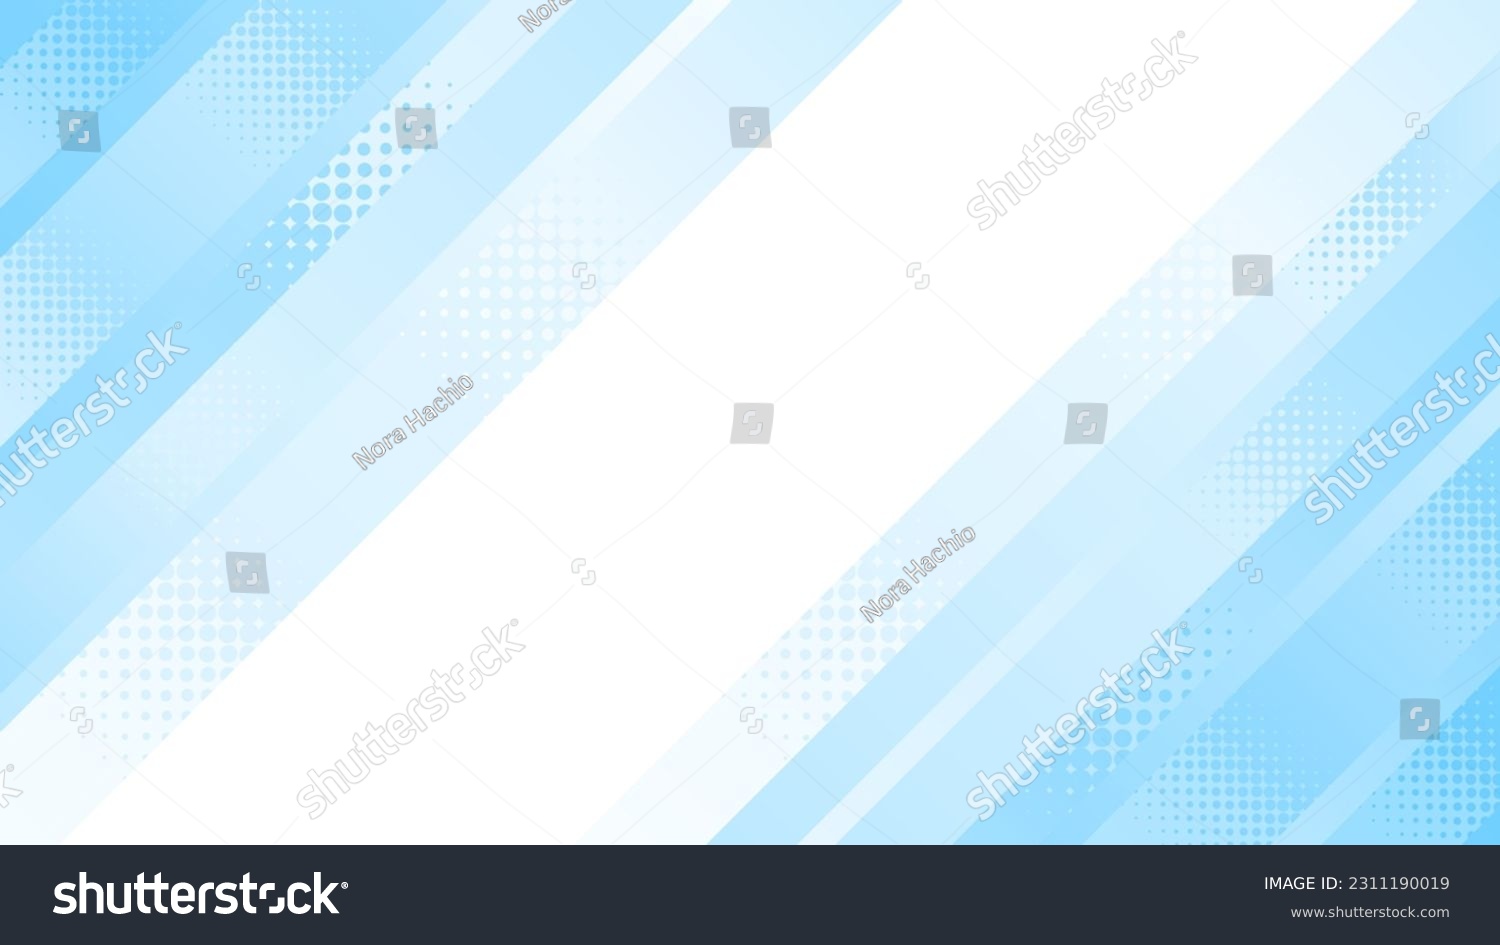 Frame illustration of diagonal stripes with gradient dots in light blue #2311190019